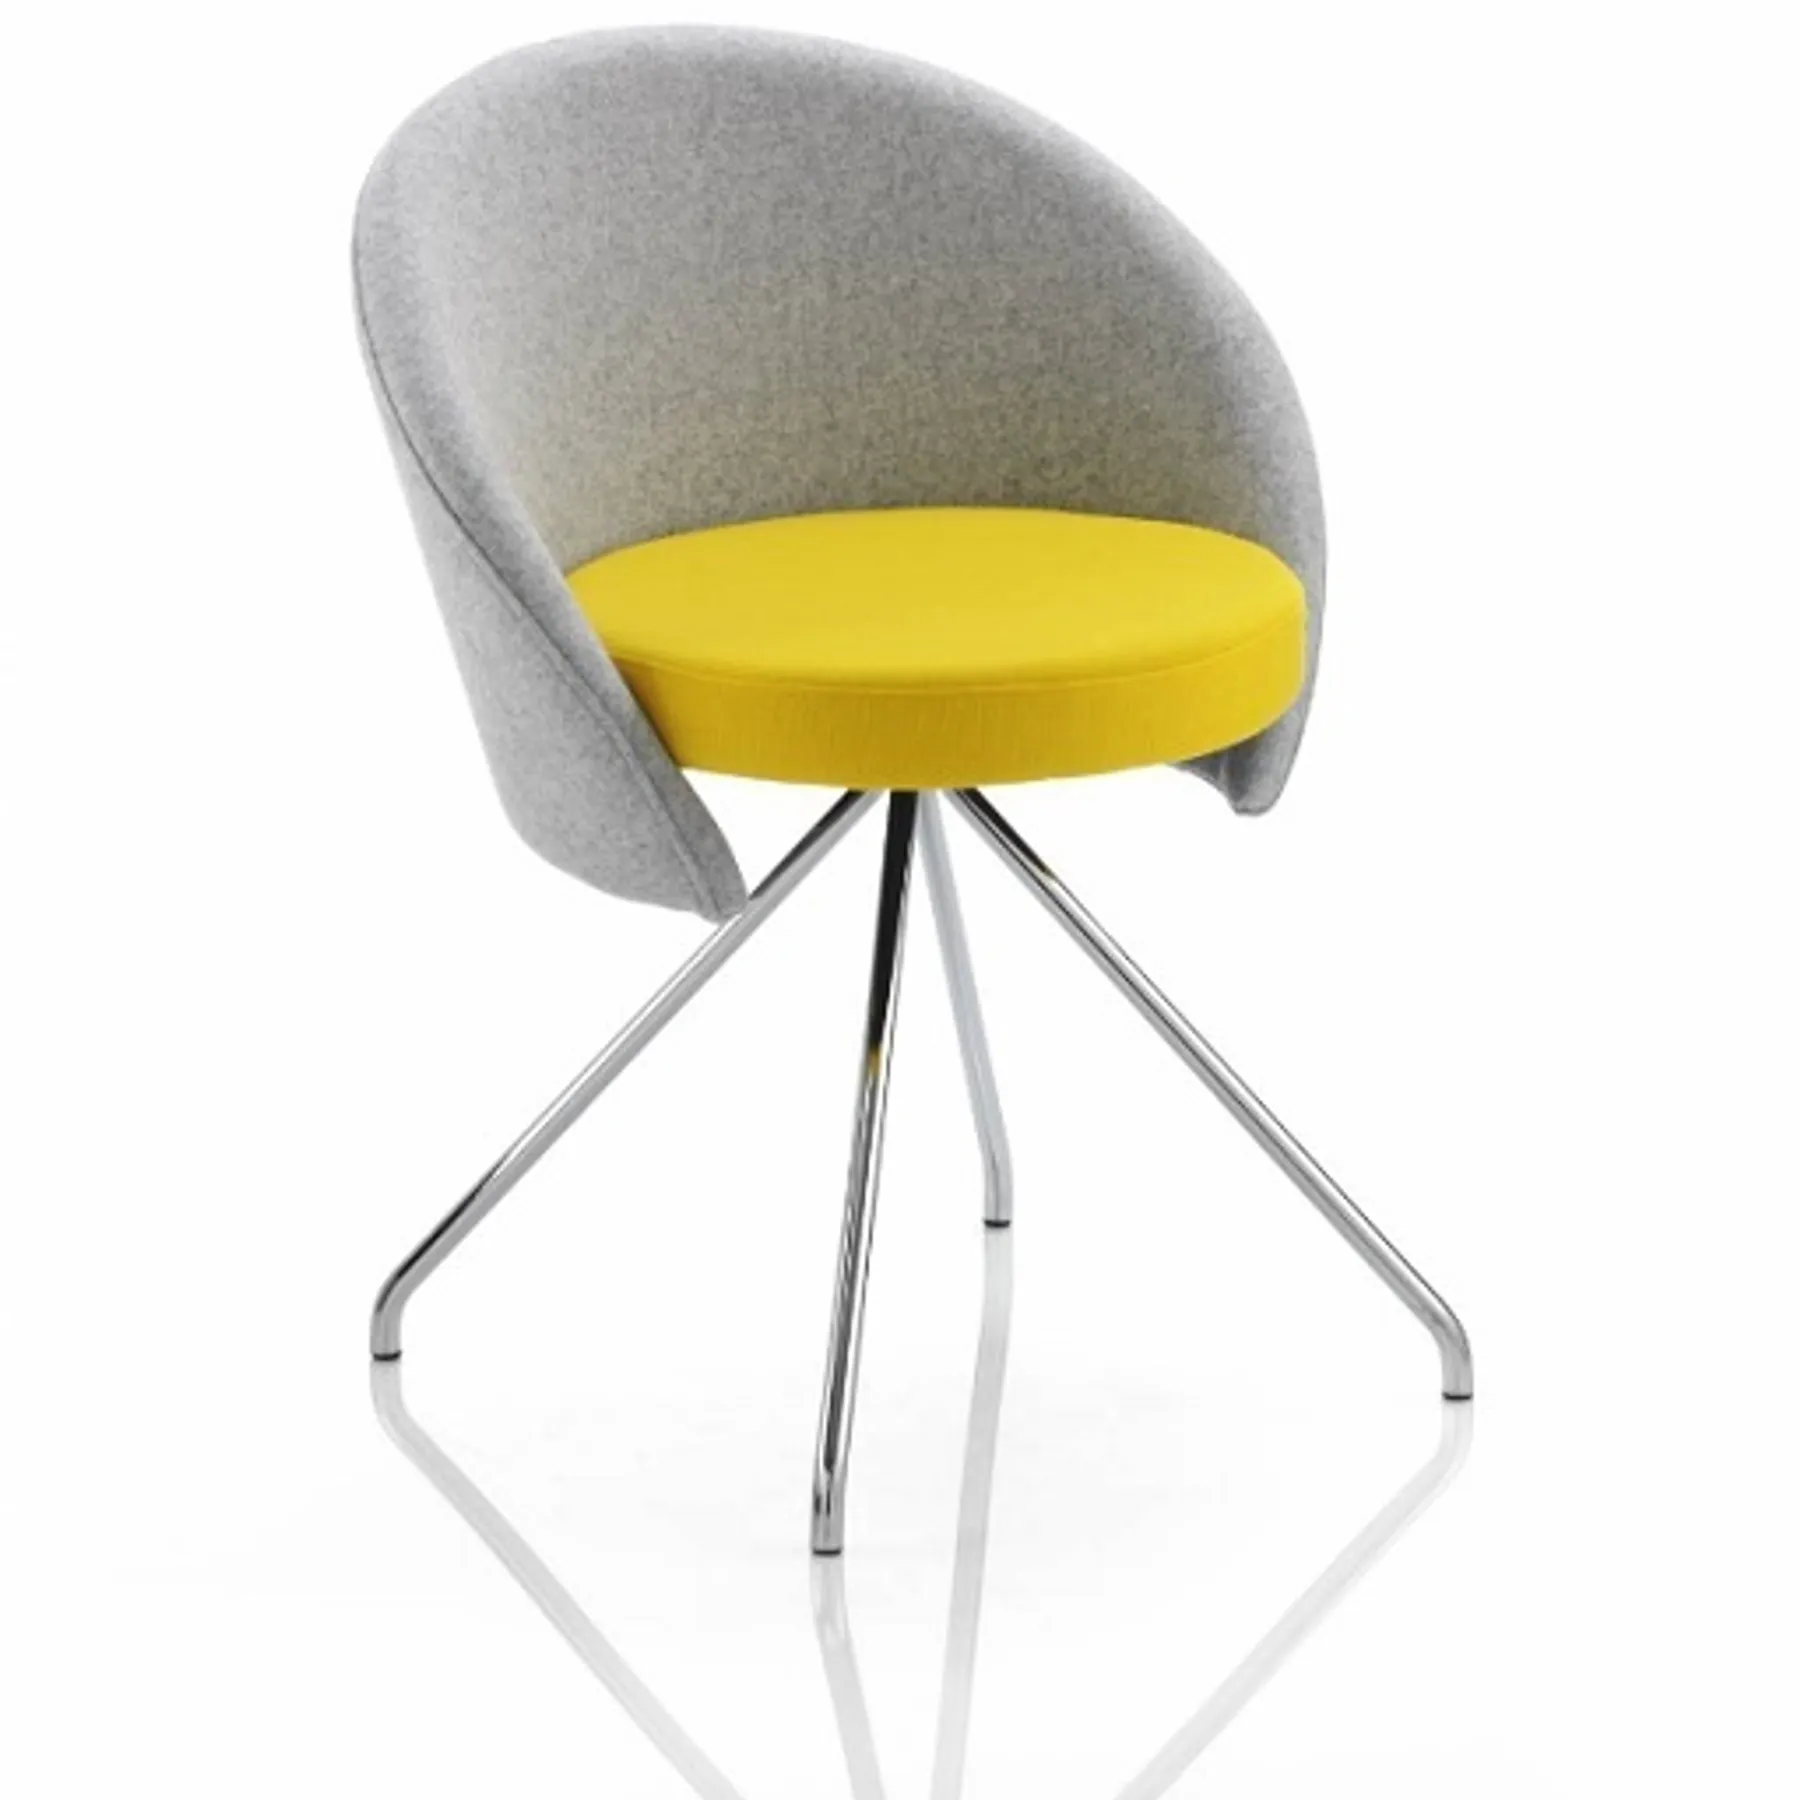 Lof Direct Giggle Chair ocee design venus front